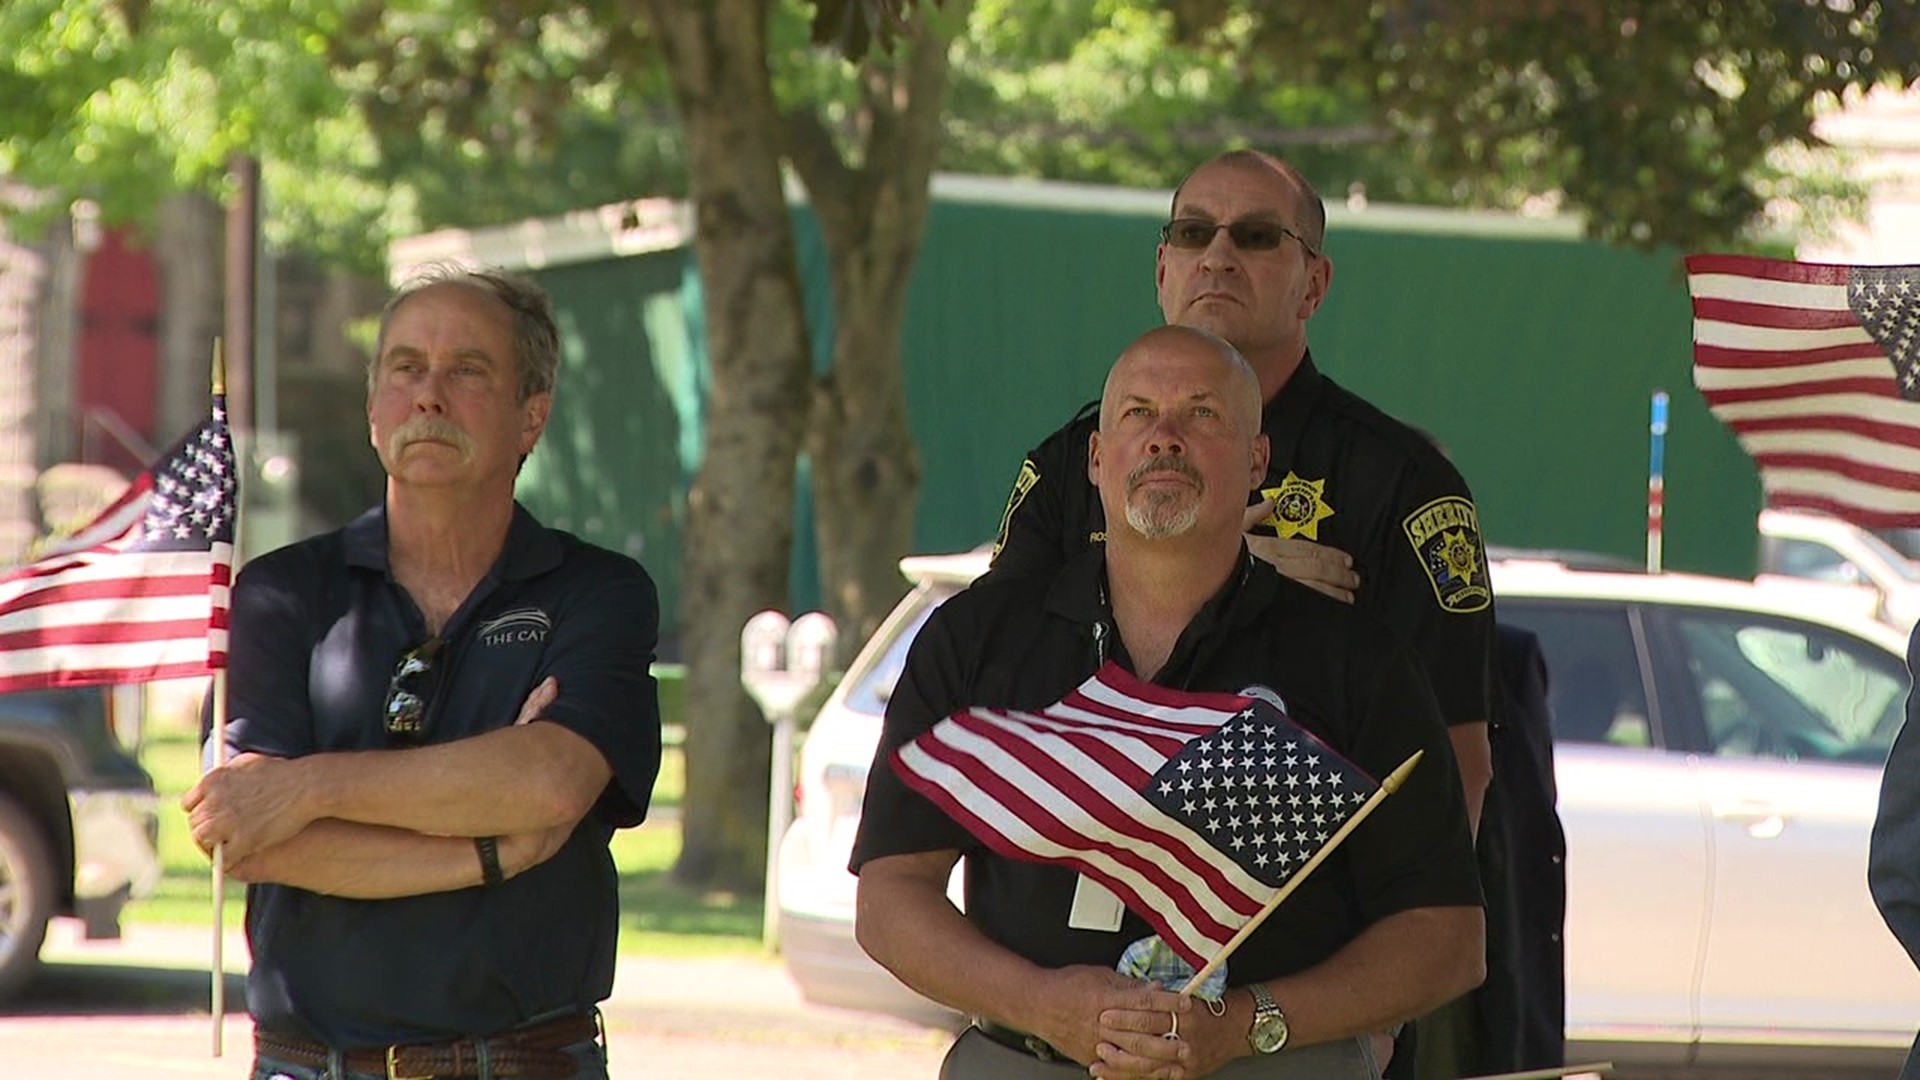 Dozens of county workers handed out flags to adults and children who watched as Old Glory was raised.